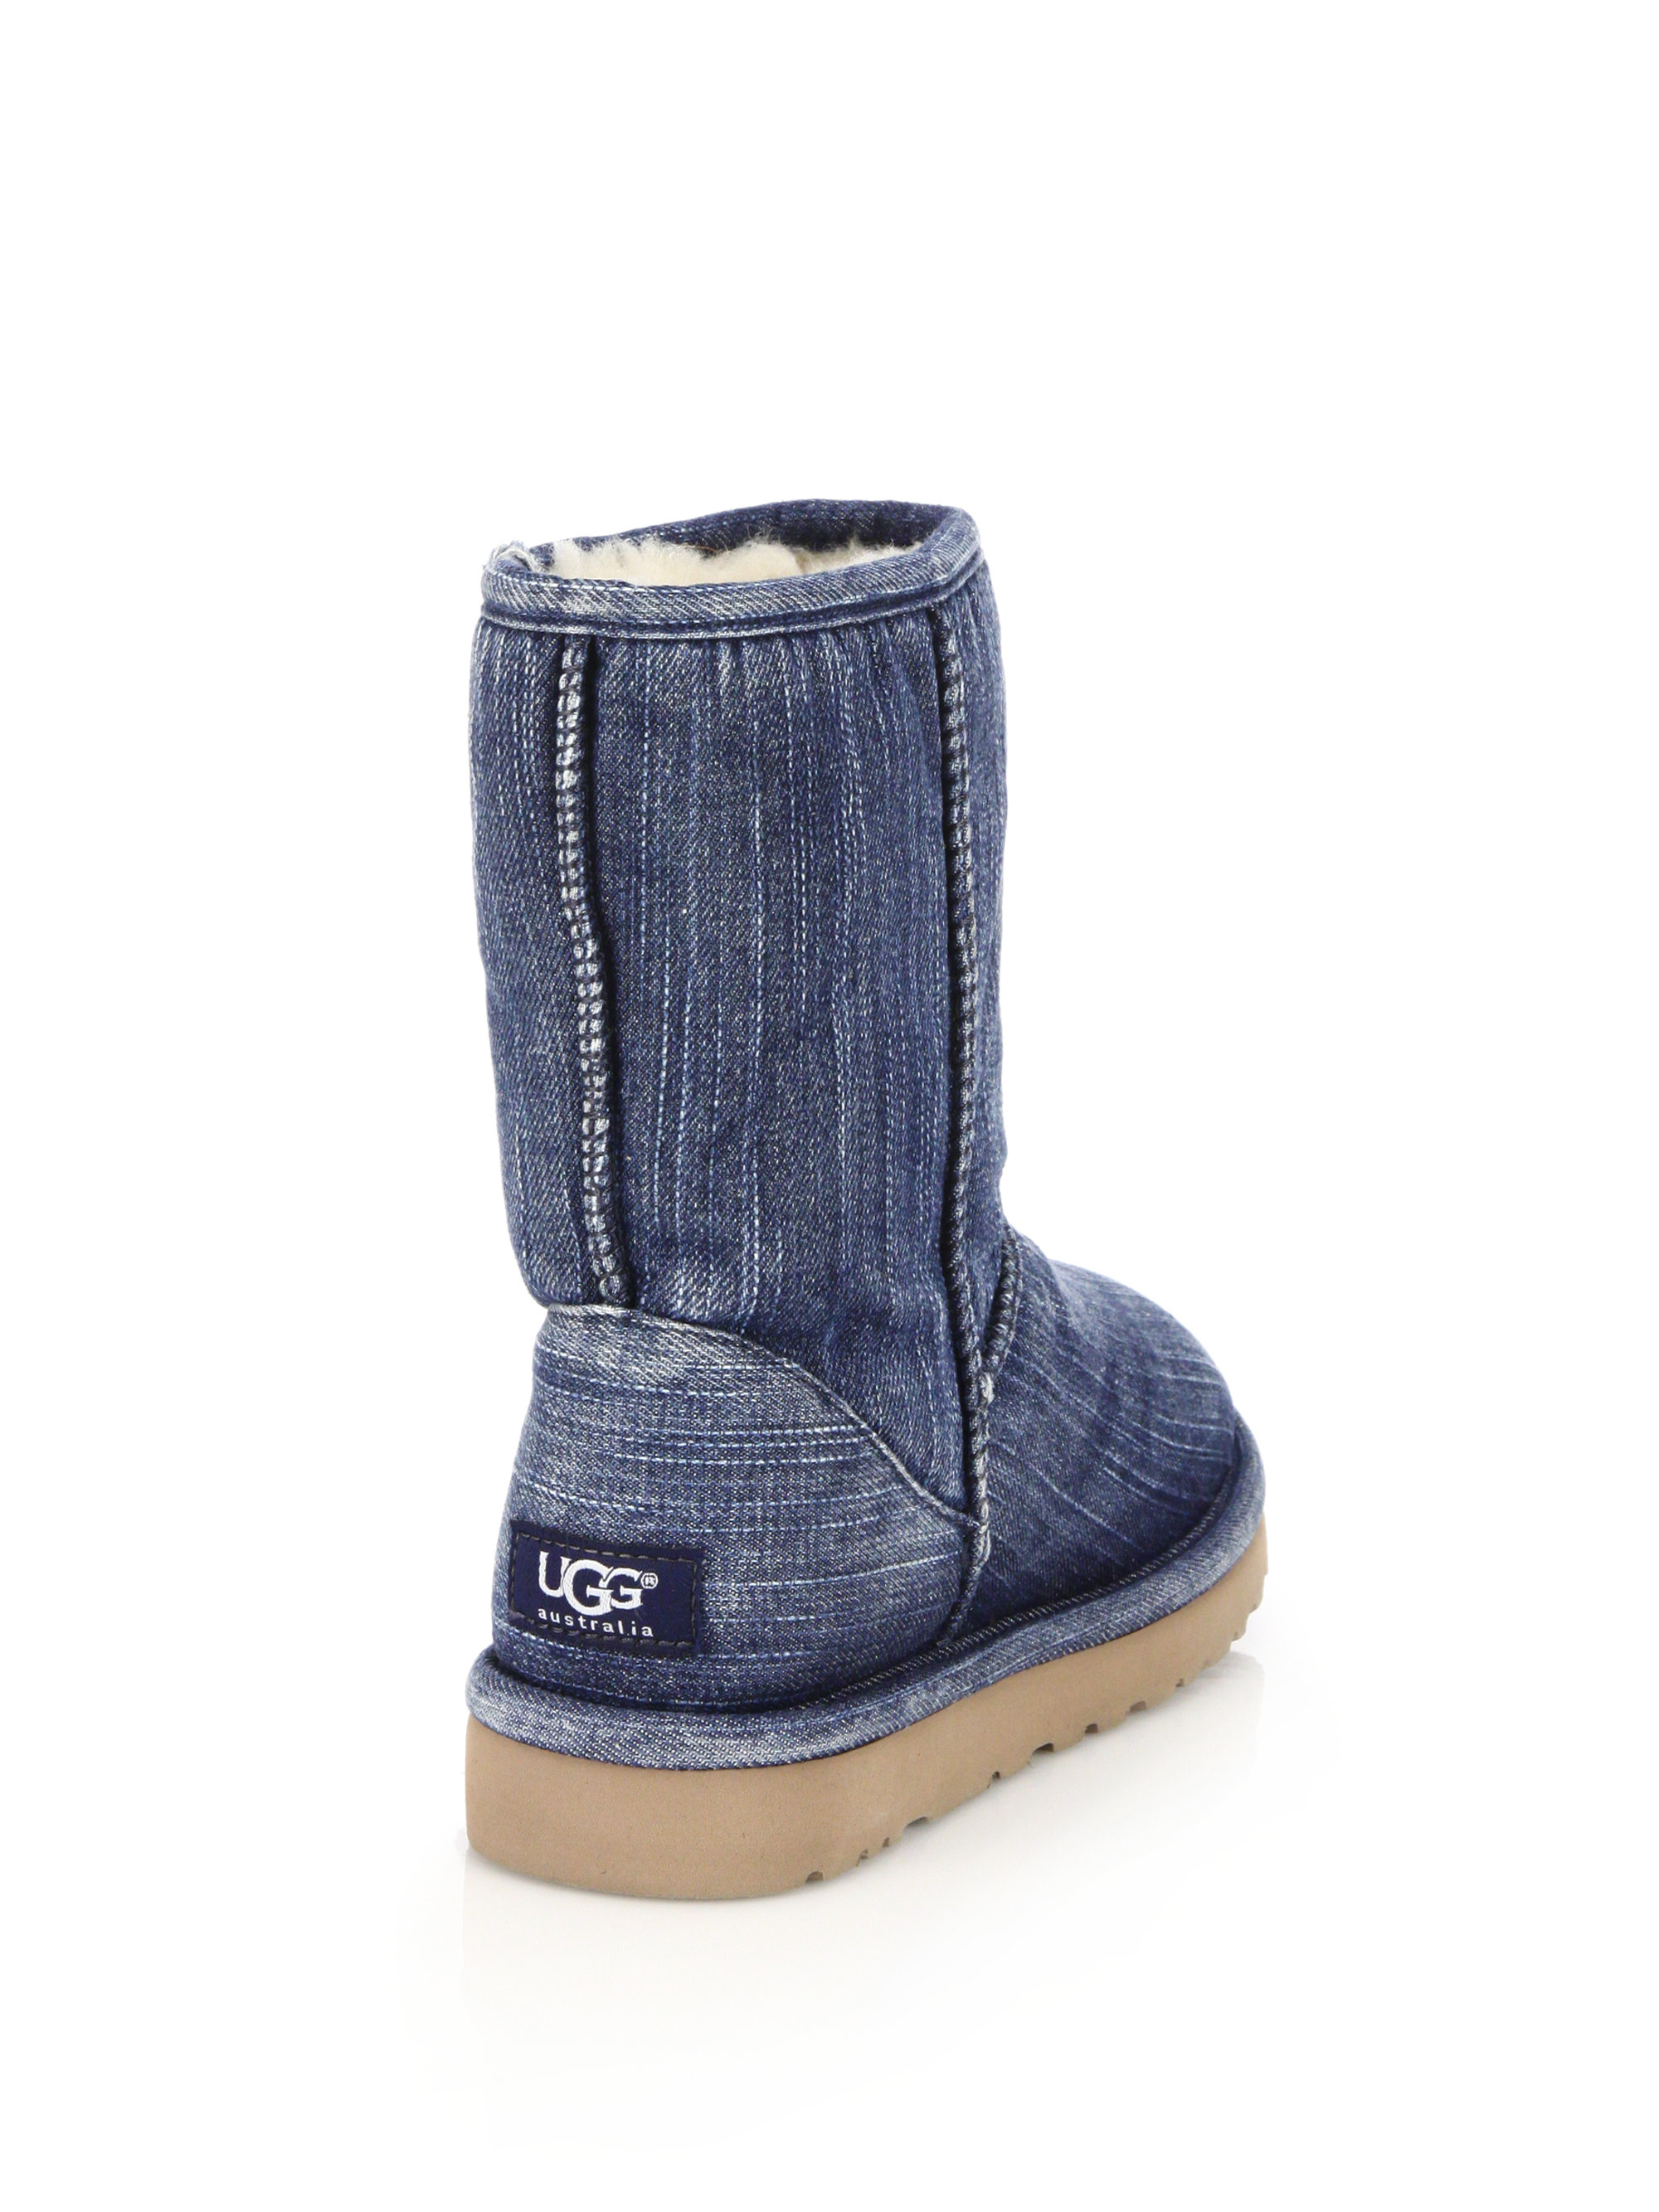 jean ugg boots